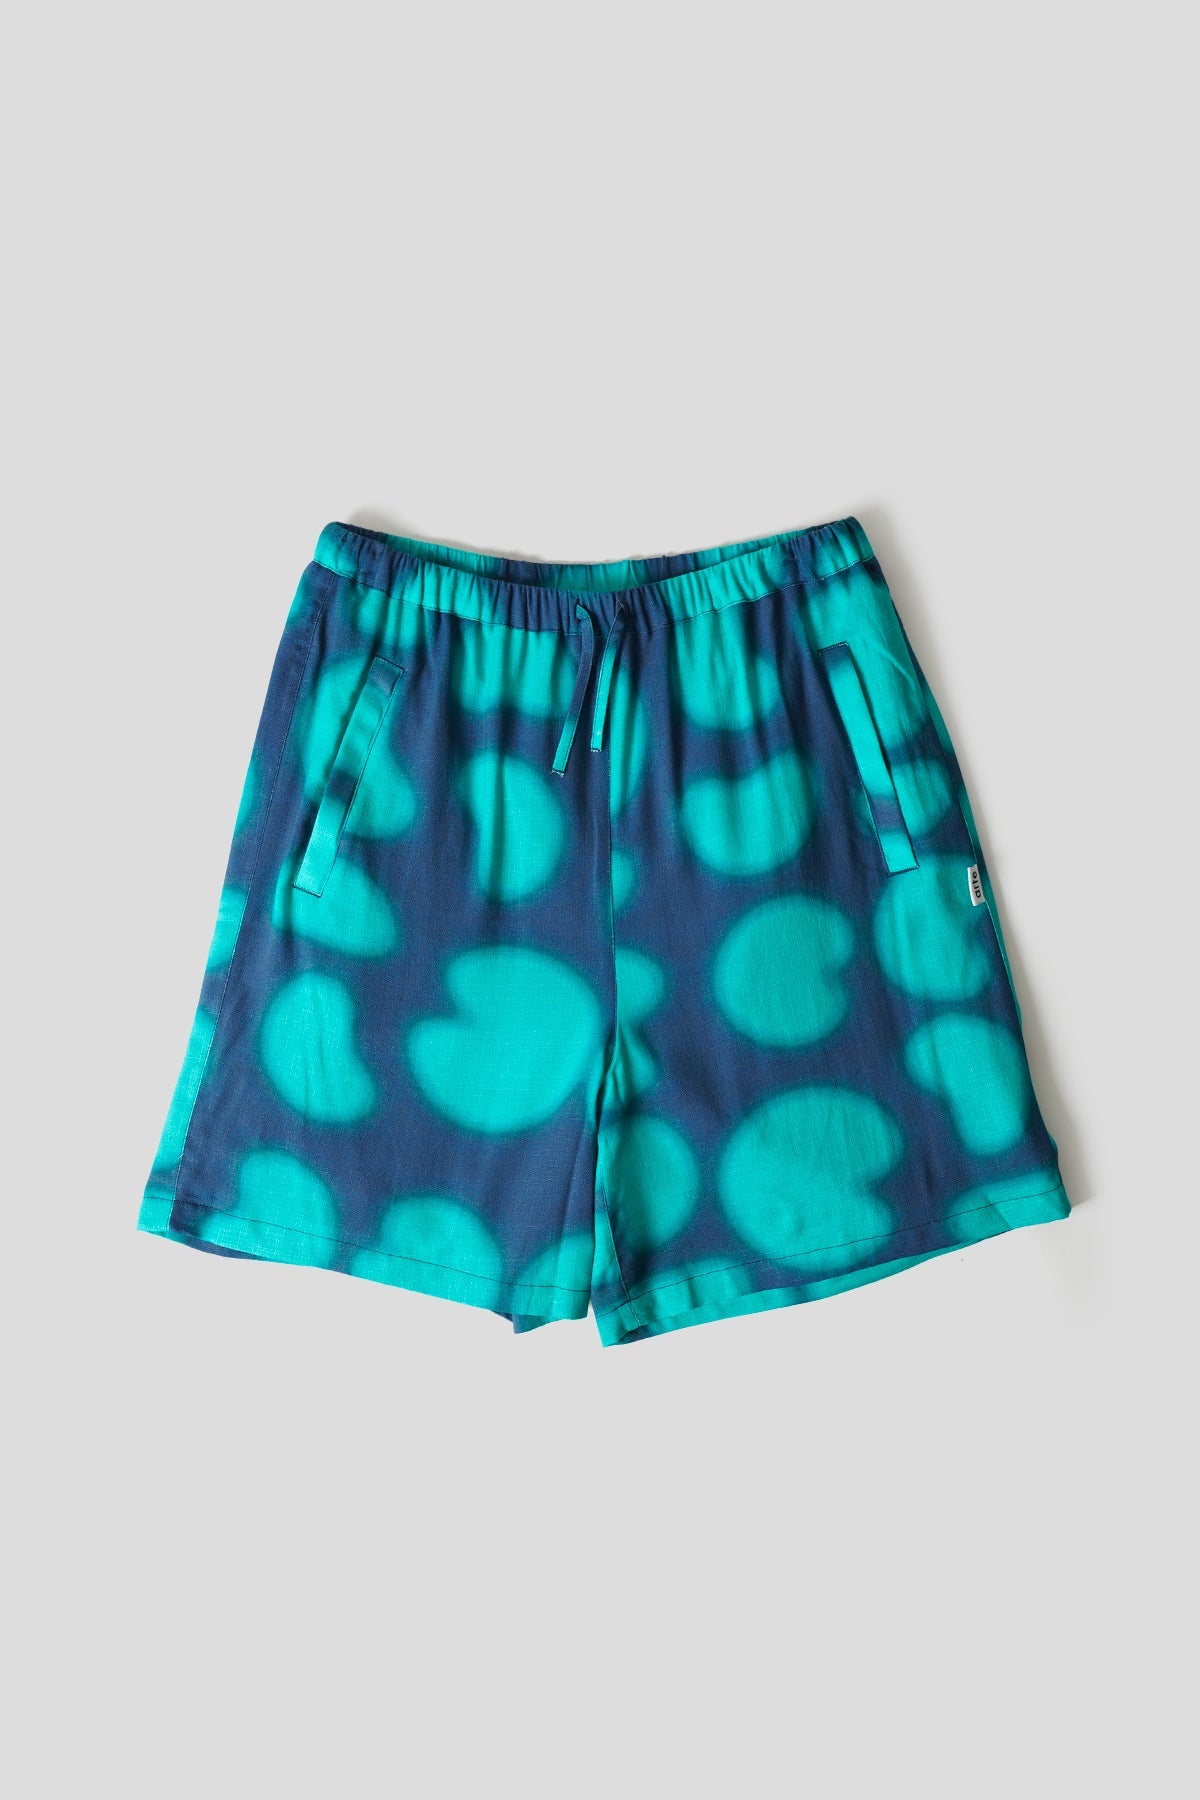 Arte - STOLP PRINT SHORTS NAVY BLUE AND GREEN - LE LABO STORE